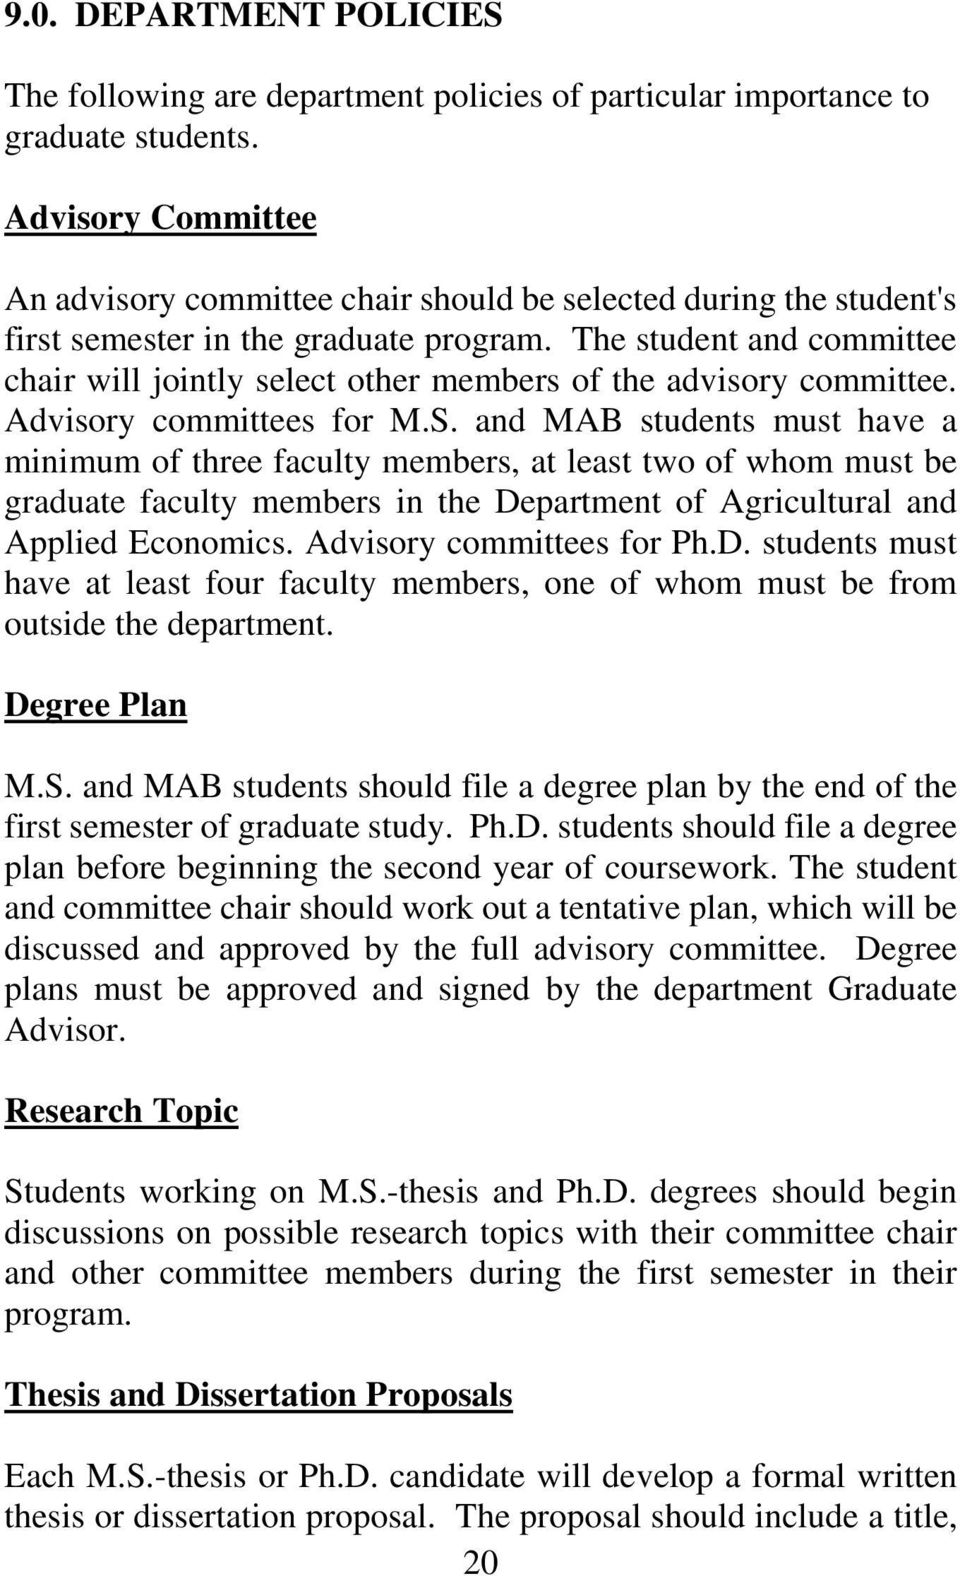 The student and committee chair will jointly select other members of the advisory committee. Advisory committees for M.S.